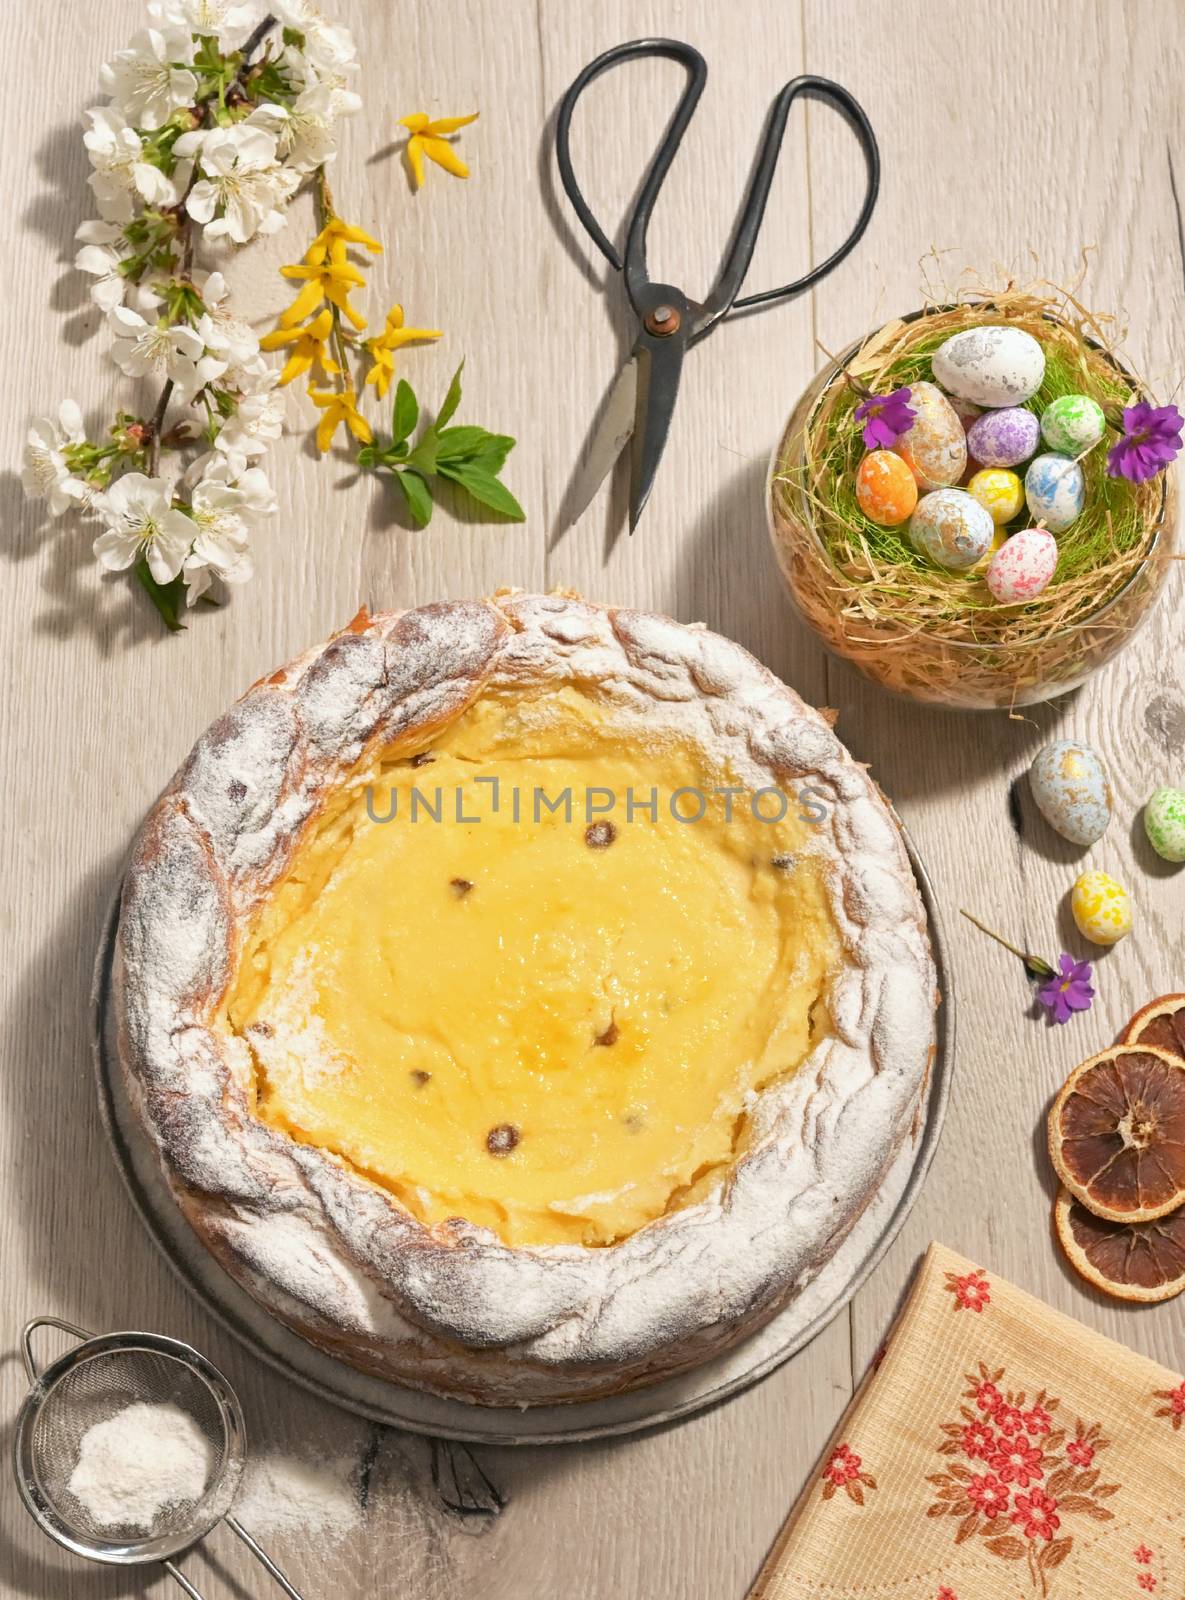 Romanian Easter bread – Pasca  by mady70